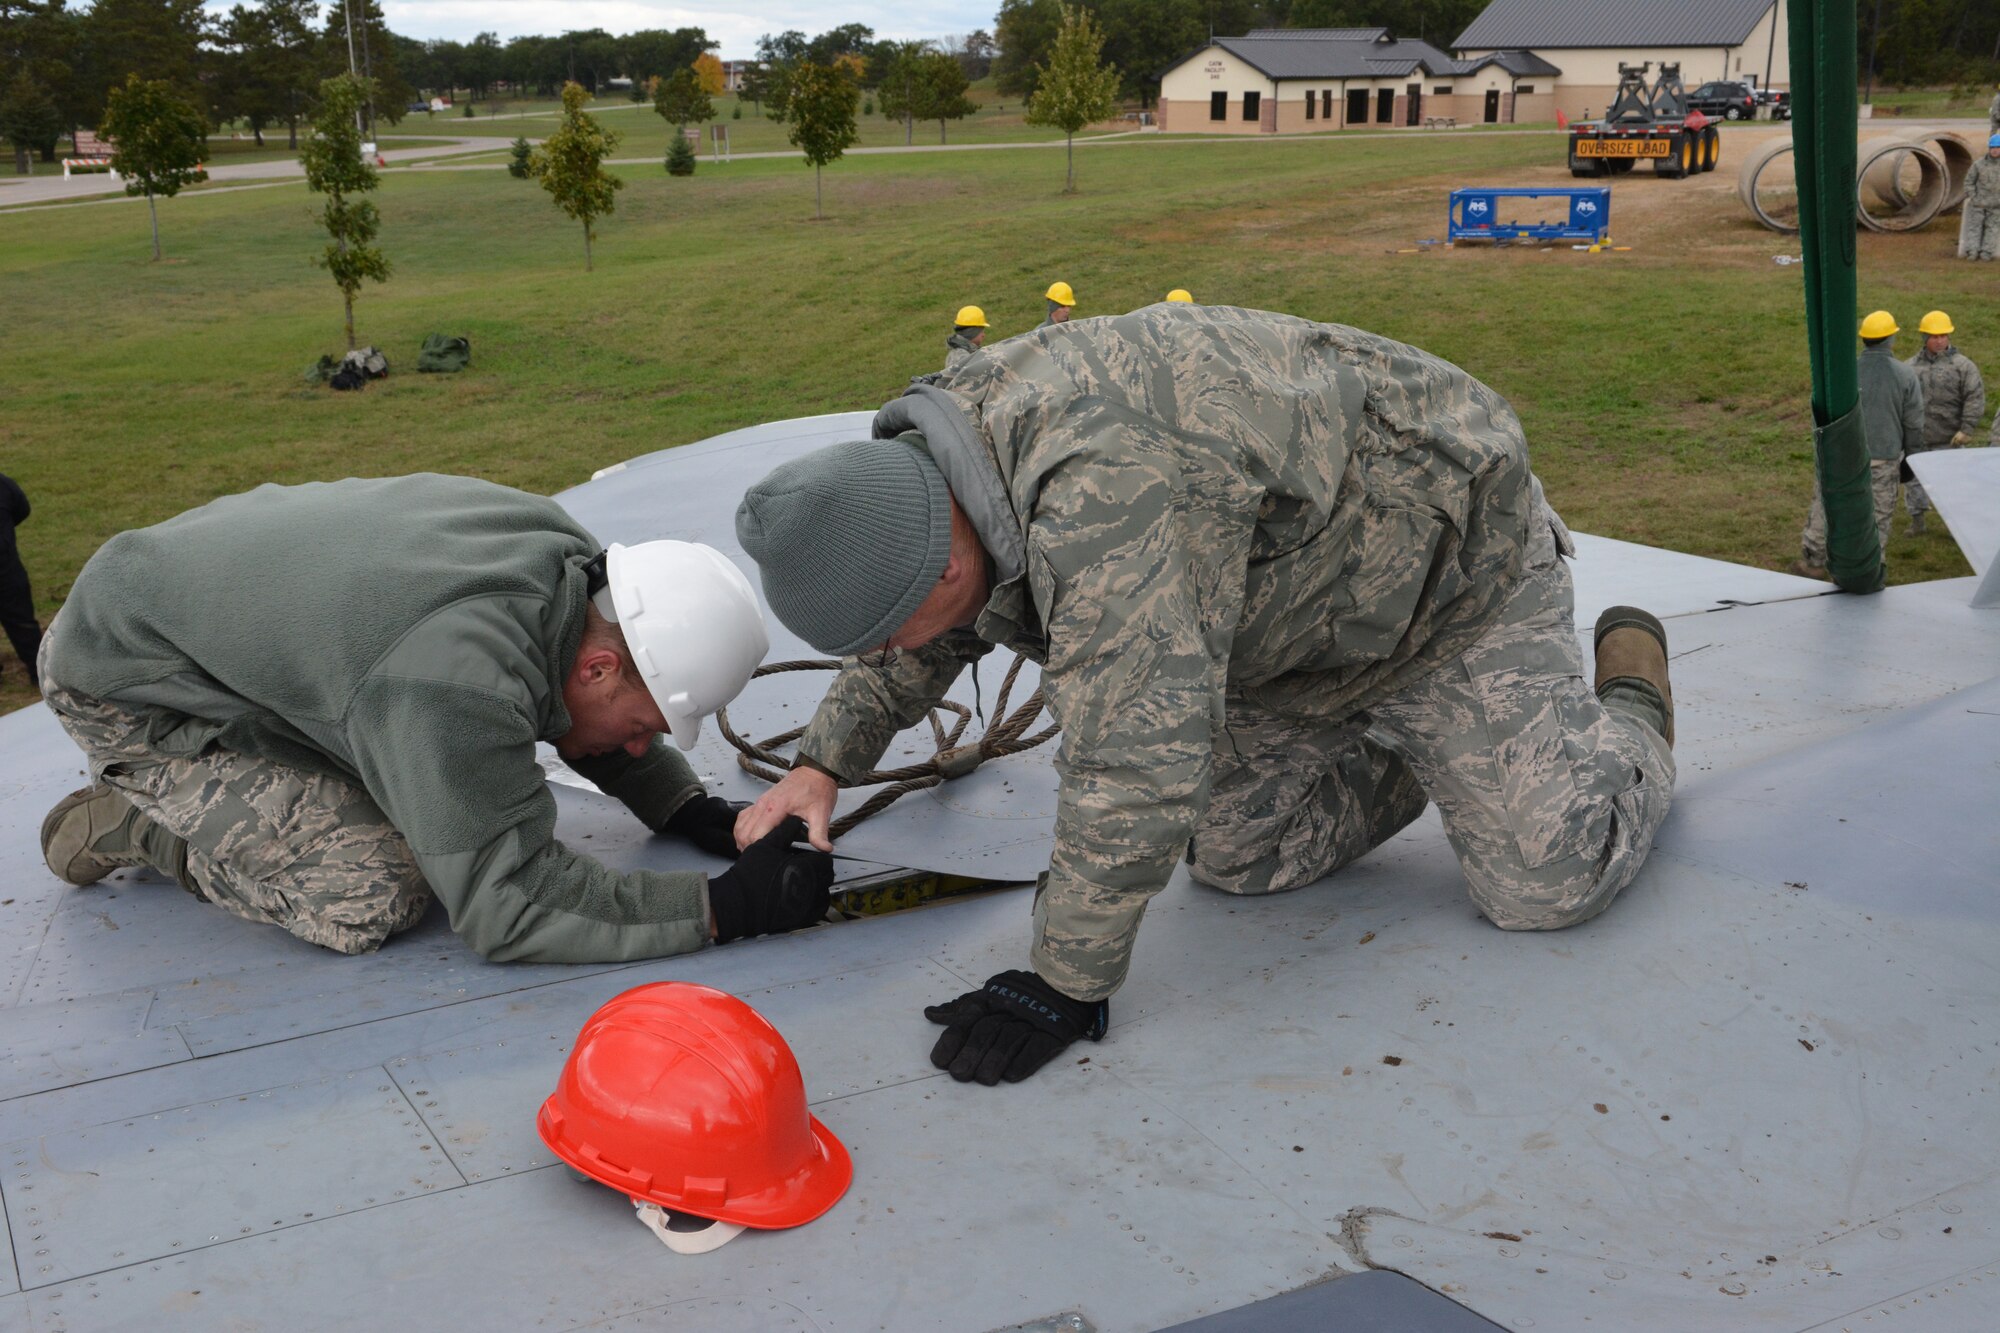 Airmen from the Crash, Damage, Disabled Aircraft Recovery training team work together to recover a jet during an exercise at Volk Field Air National Guard Base, Camp Douglas, Wis., Oct. 4, 2014. CDDAR teams from across the nation were tested with simulated aircraft crash exercises, and as their leadership stood back, were forced to make decisions on how to transport and/or recover the aircraft. (U.S. Air National Guard photo by Staff Sgt. Ryan Roth)